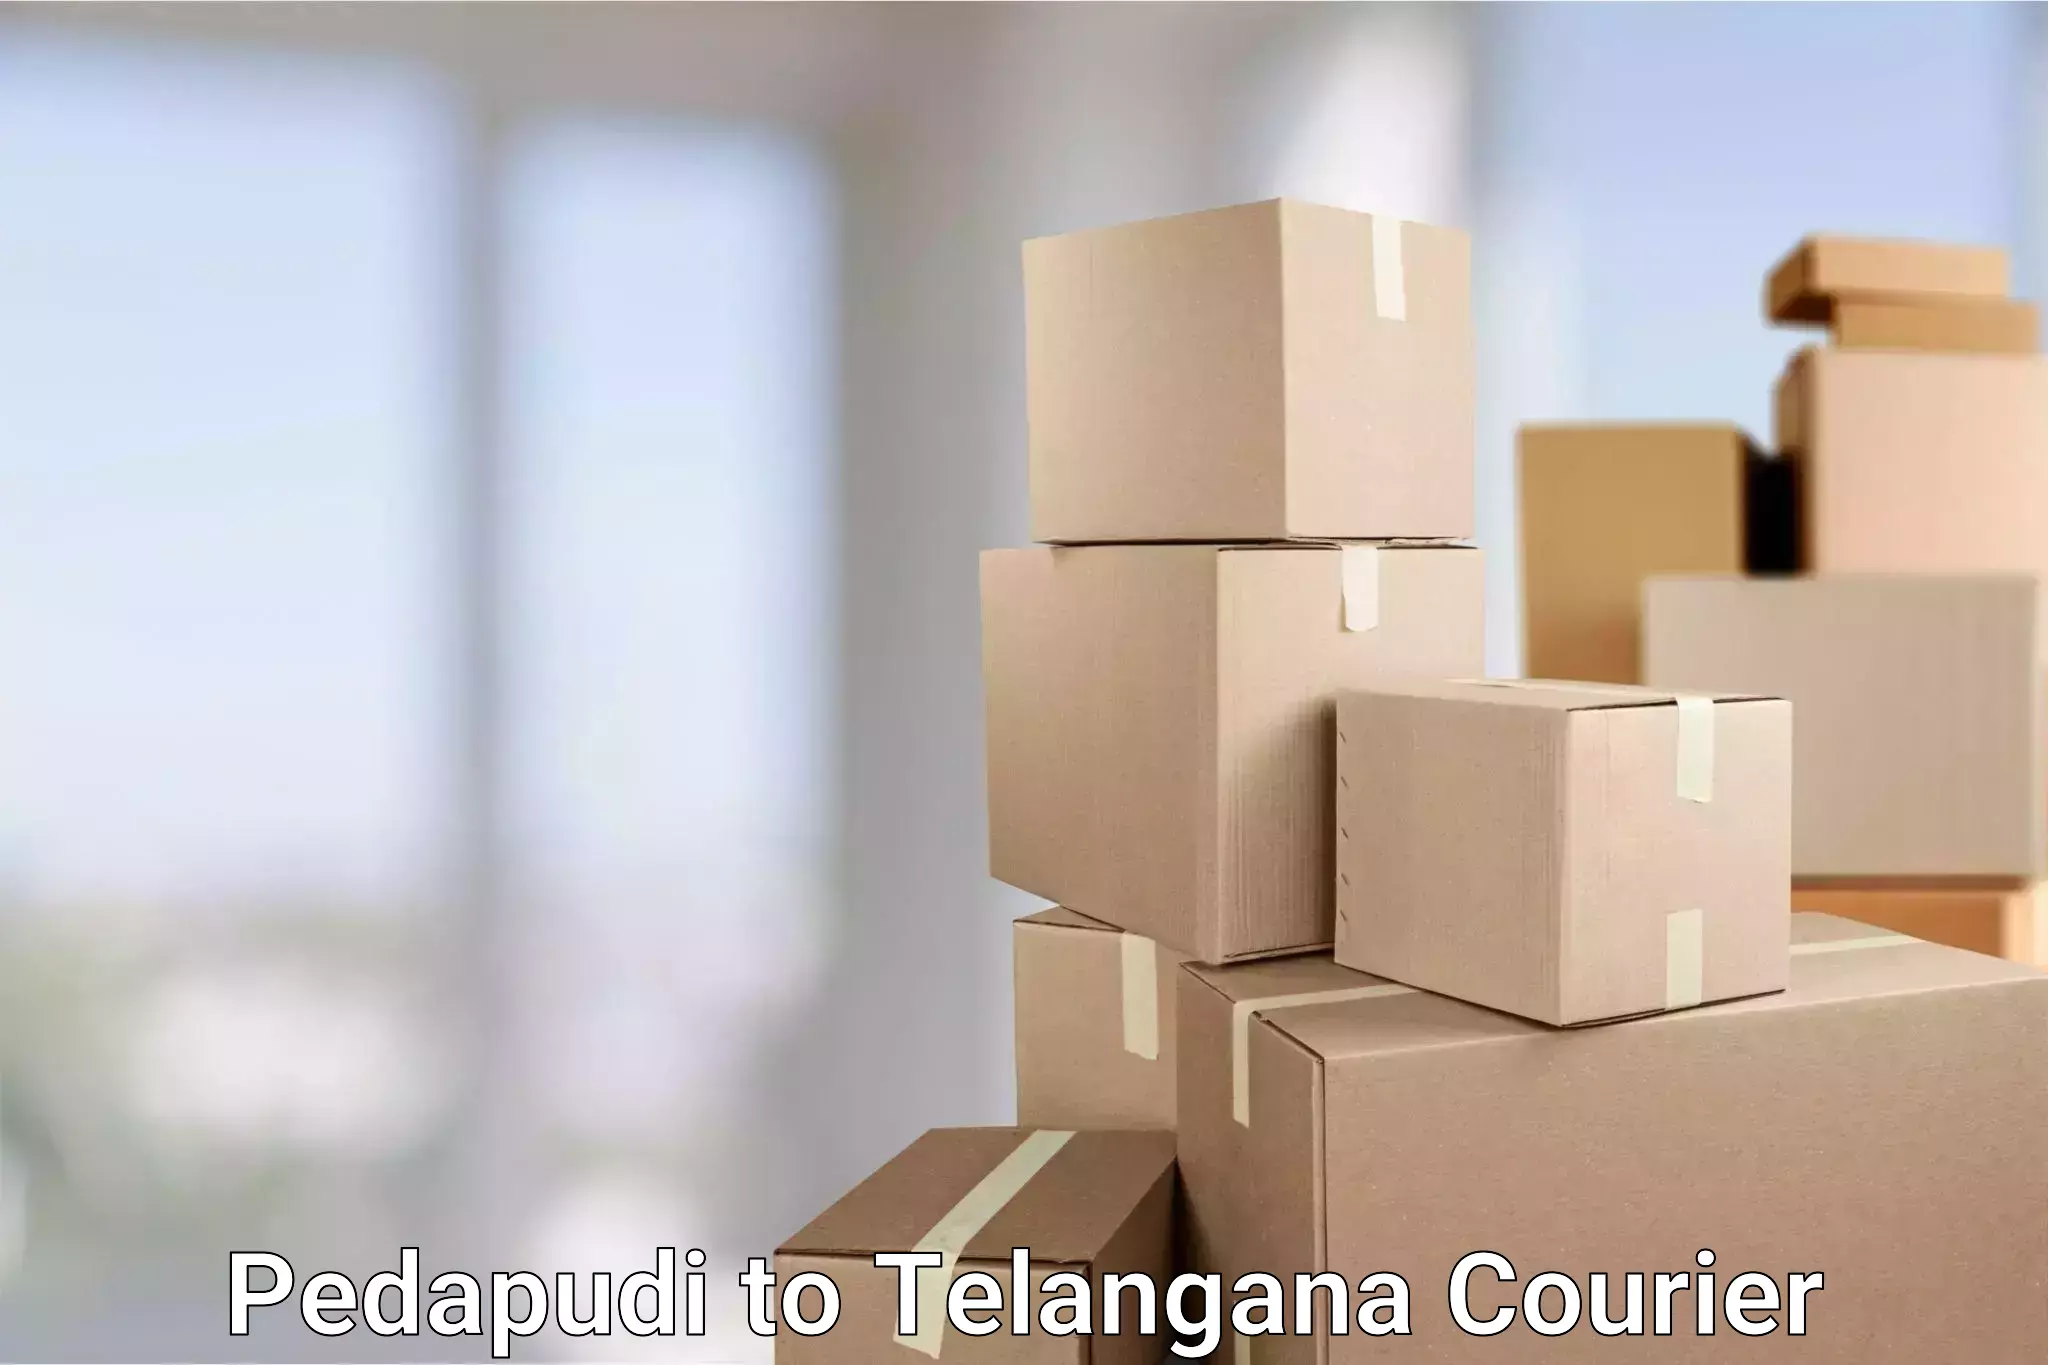 Reliable parcel services in Pedapudi to Yacharam